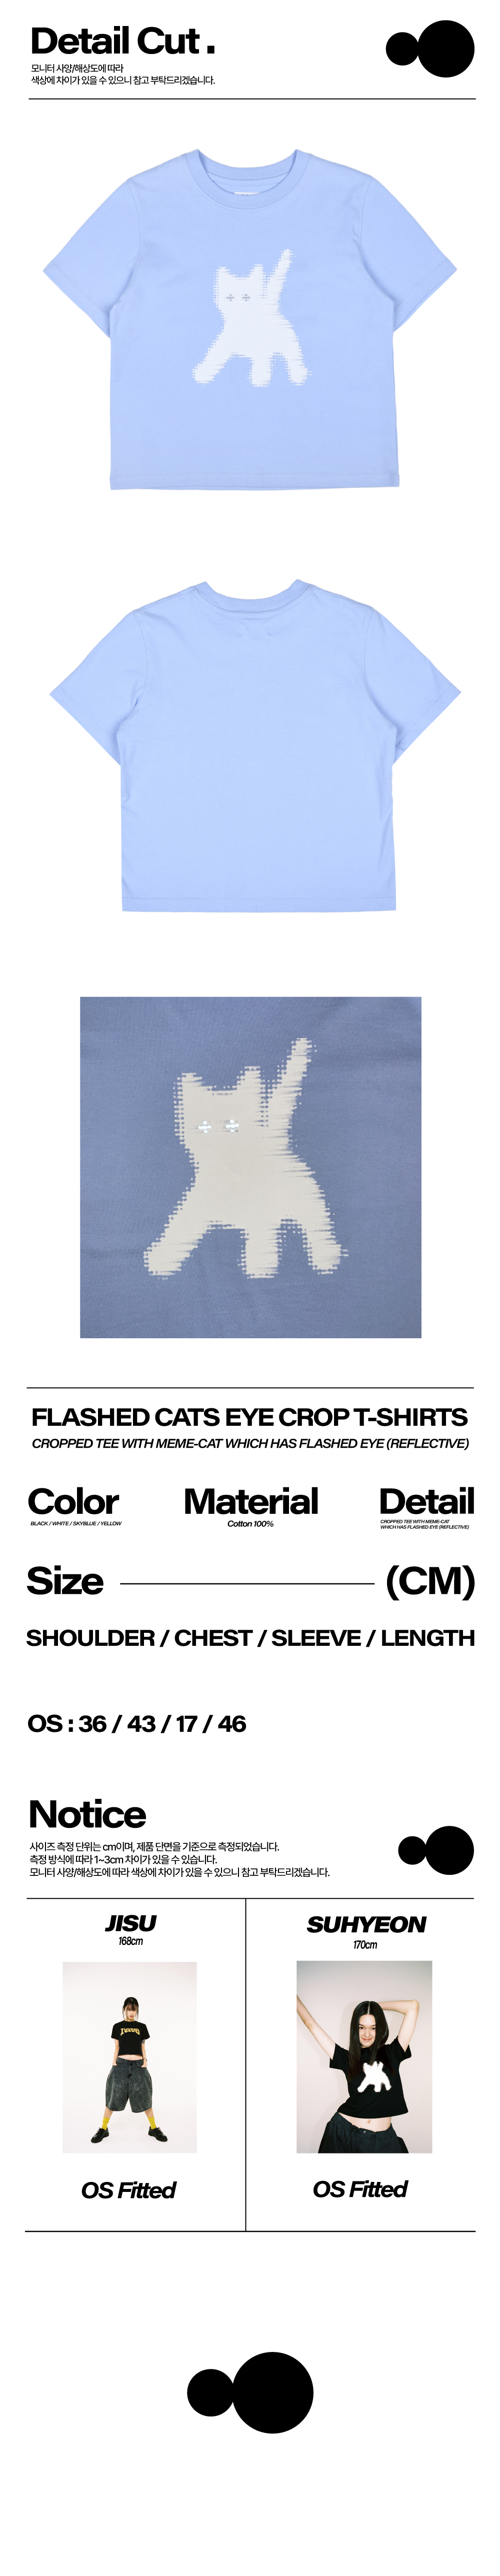 FLASHED%20CATS%20EYE%20CROP%20T-SHIRTS%20%5BSKYBLUE%5D%202.png